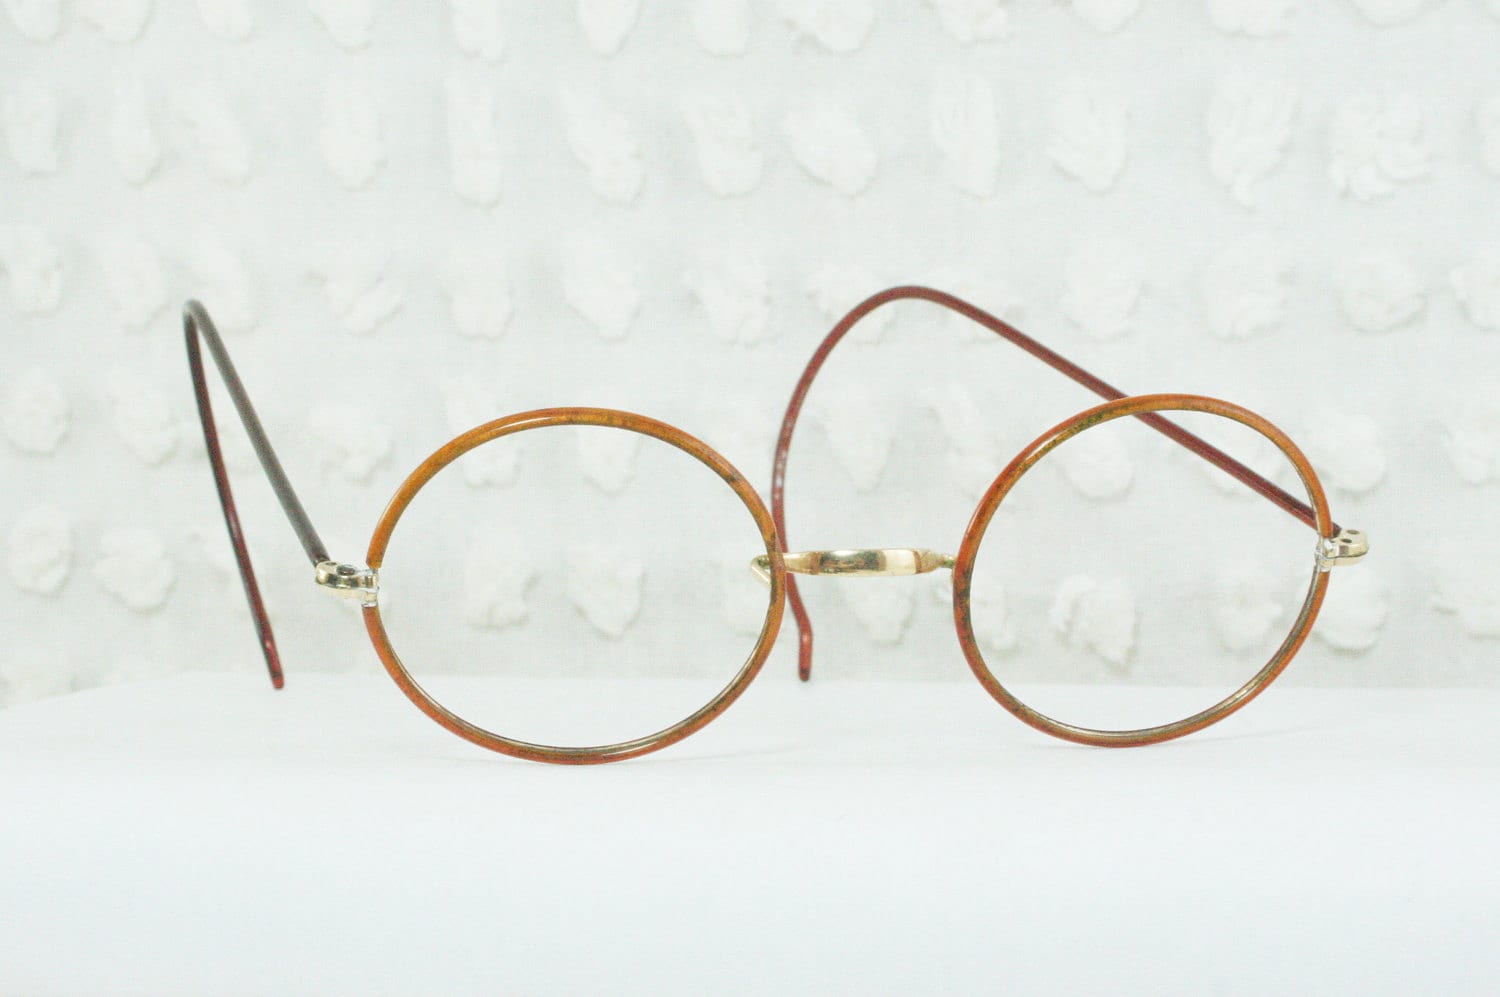 30s Eyeglasses 1930s Round Glasses Celluloid Covered By Diaeyewear